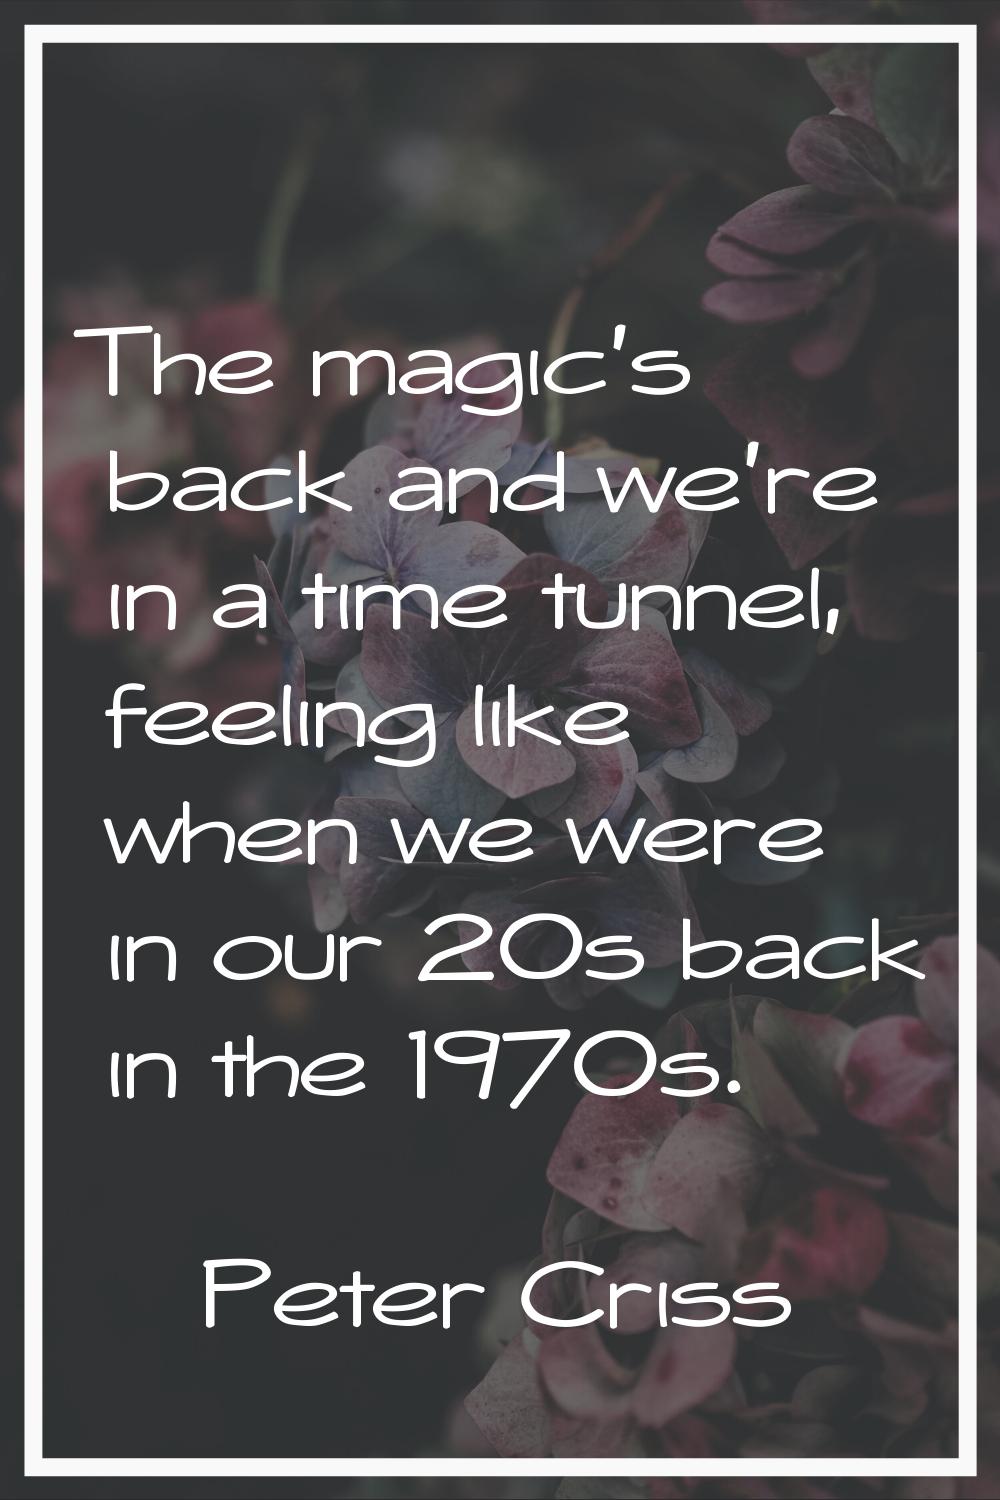 The magic's back and we're in a time tunnel, feeling like when we were in our 20s back in the 1970s